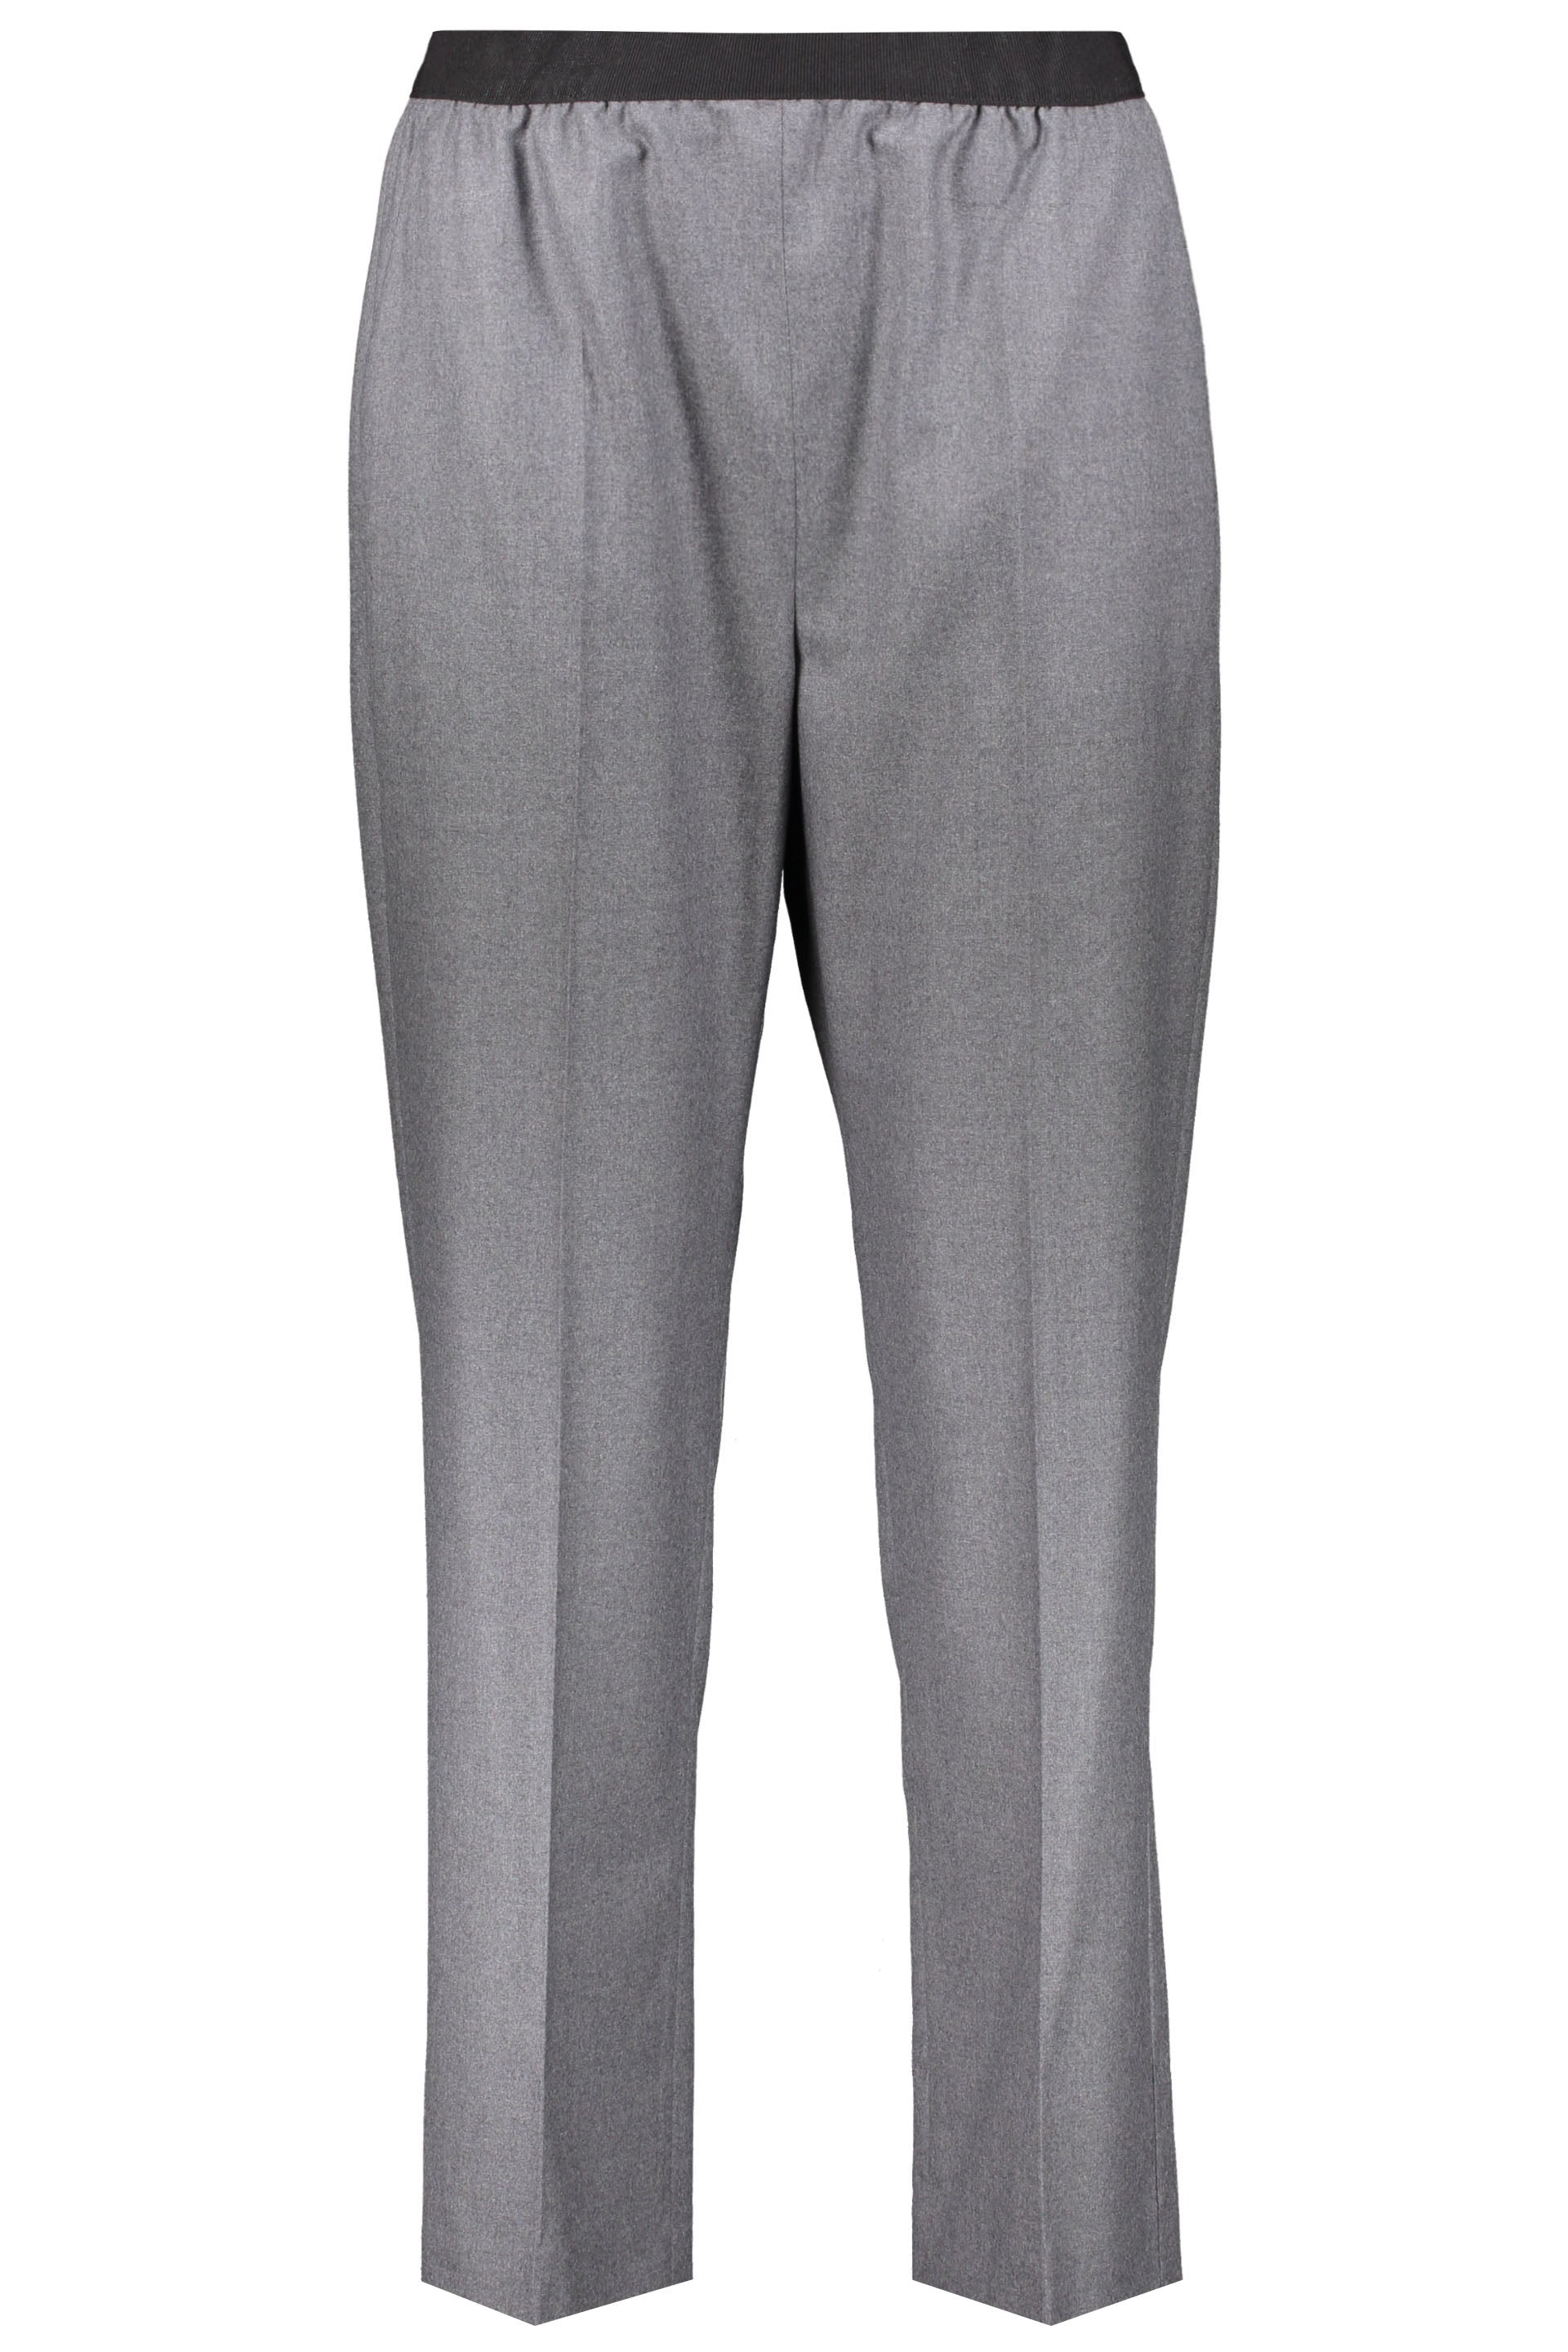 Agnona-OUTLET-SALE-Wool-trousers-Hosen-46-ARCHIVE-COLLECTION.jpg